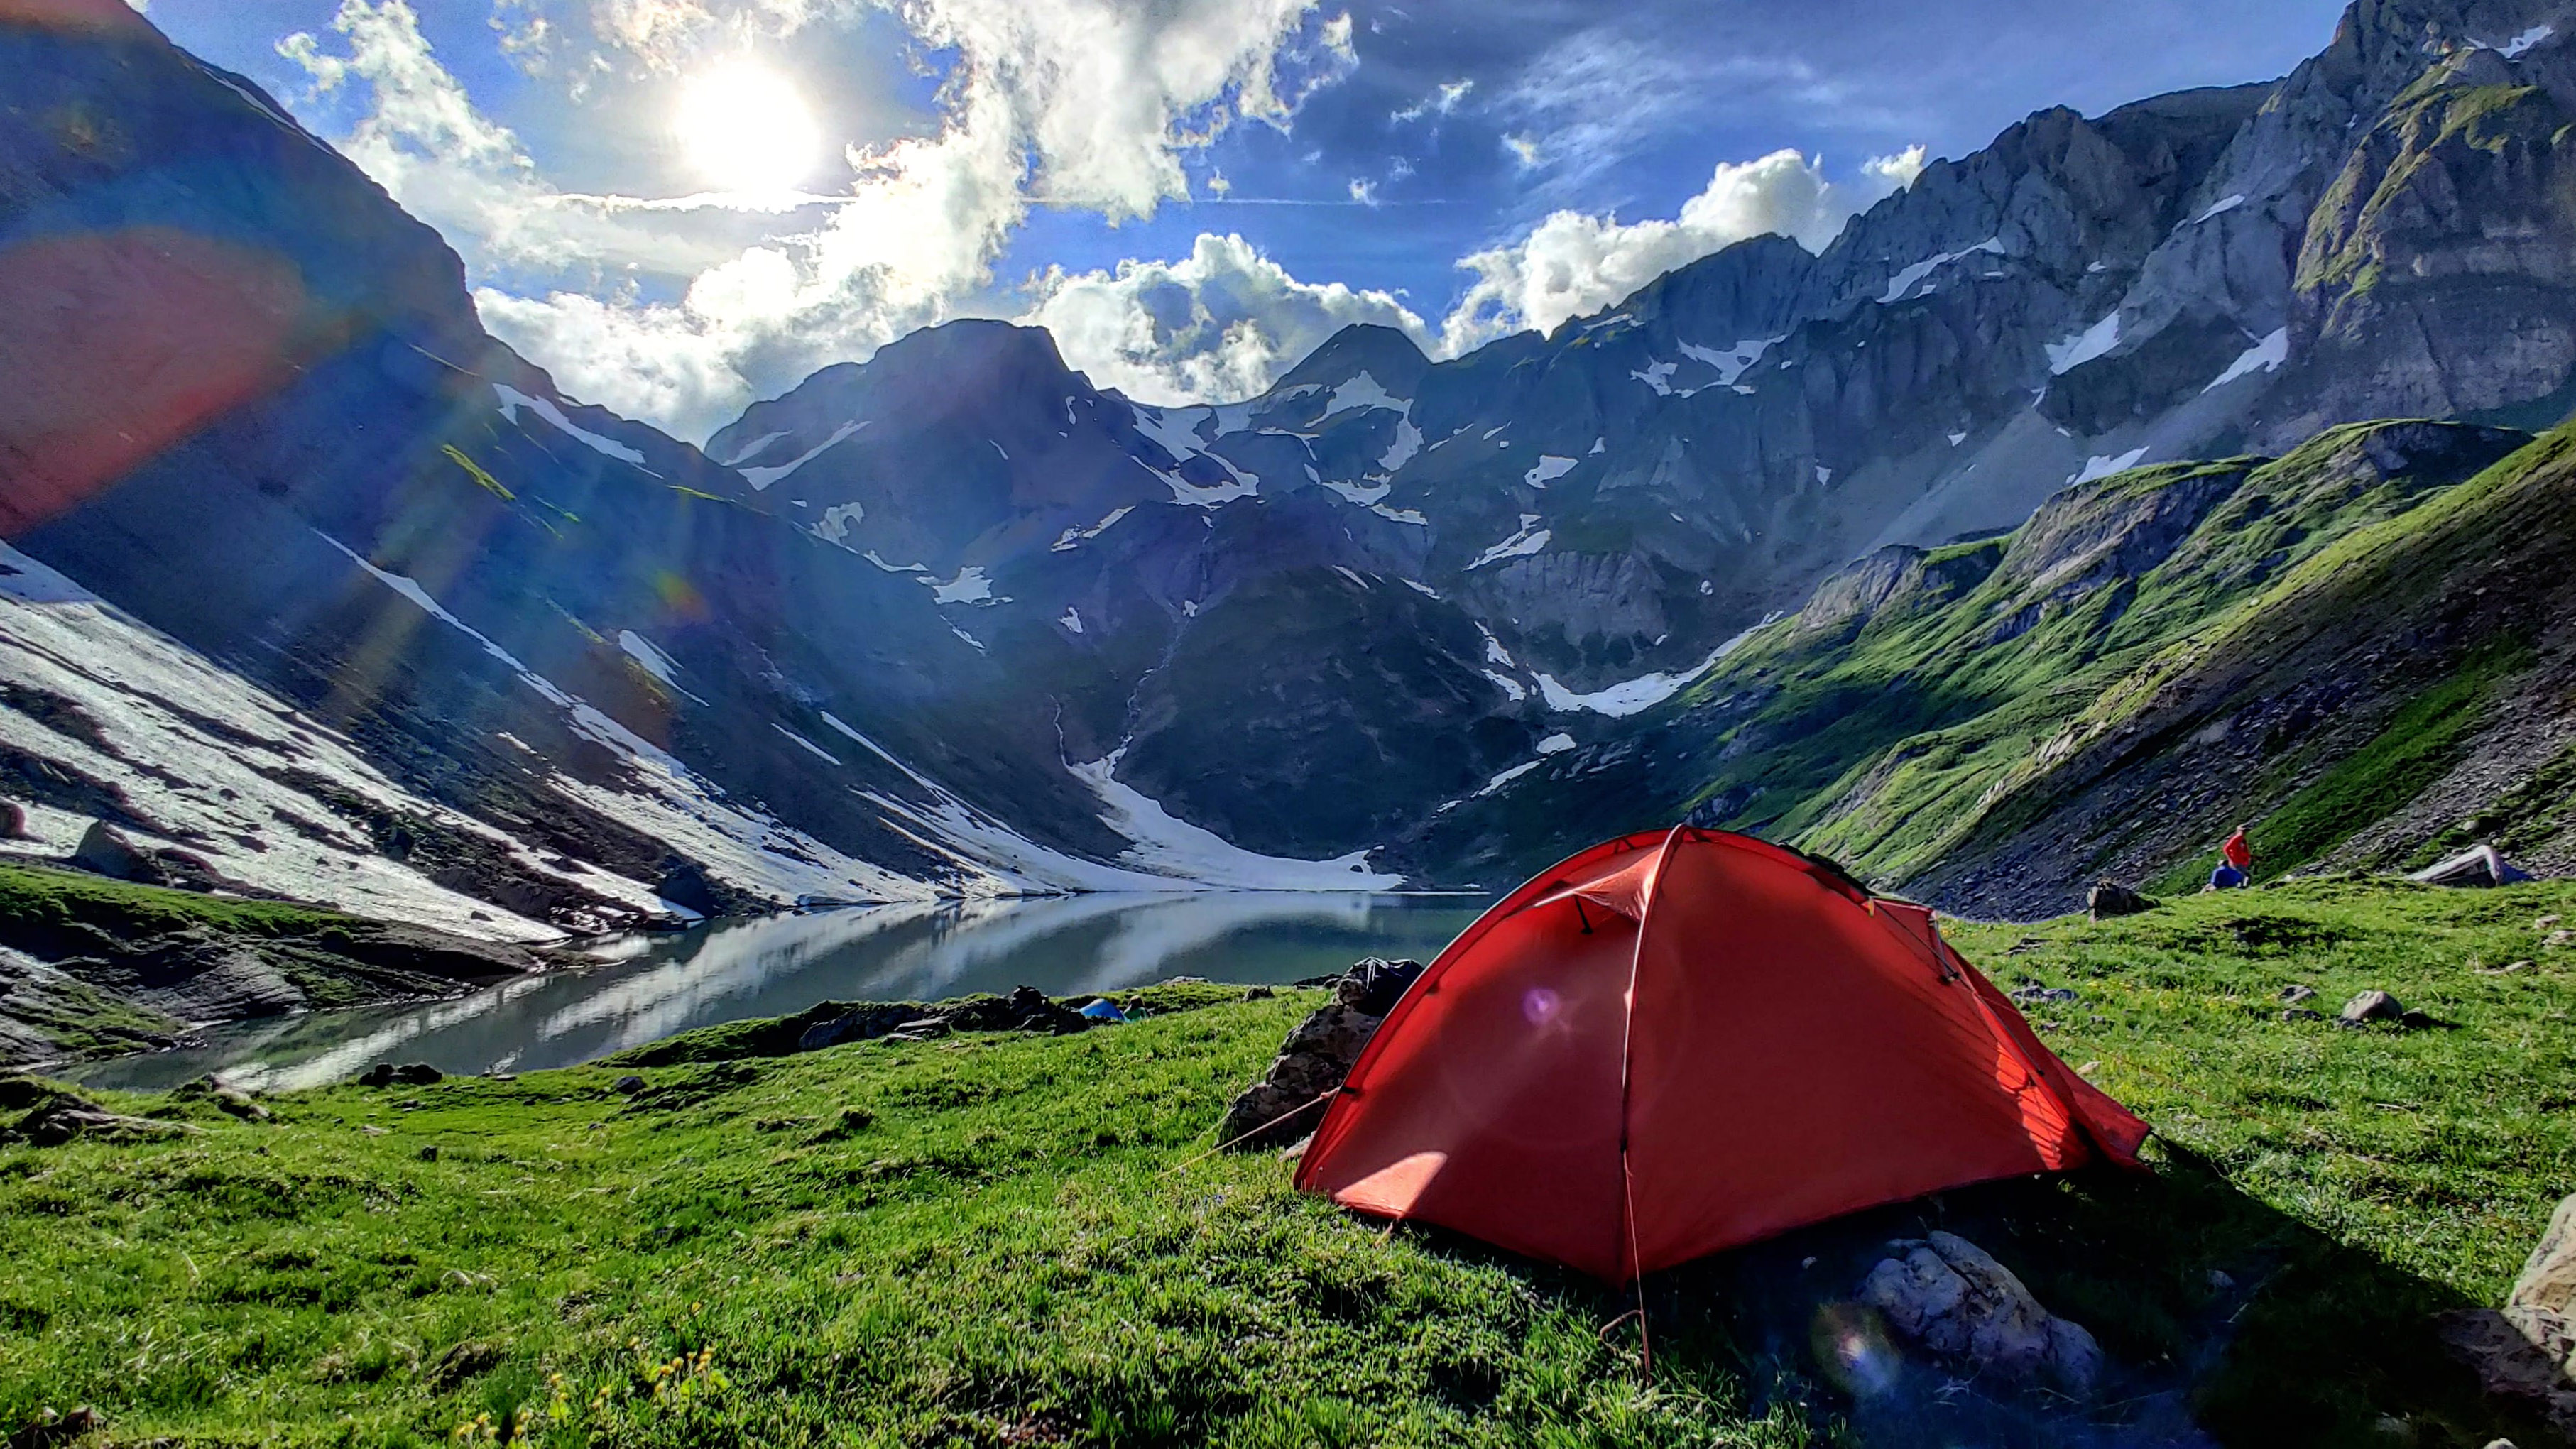 7 reasons you need a dry bag: wild camp by mountain pool